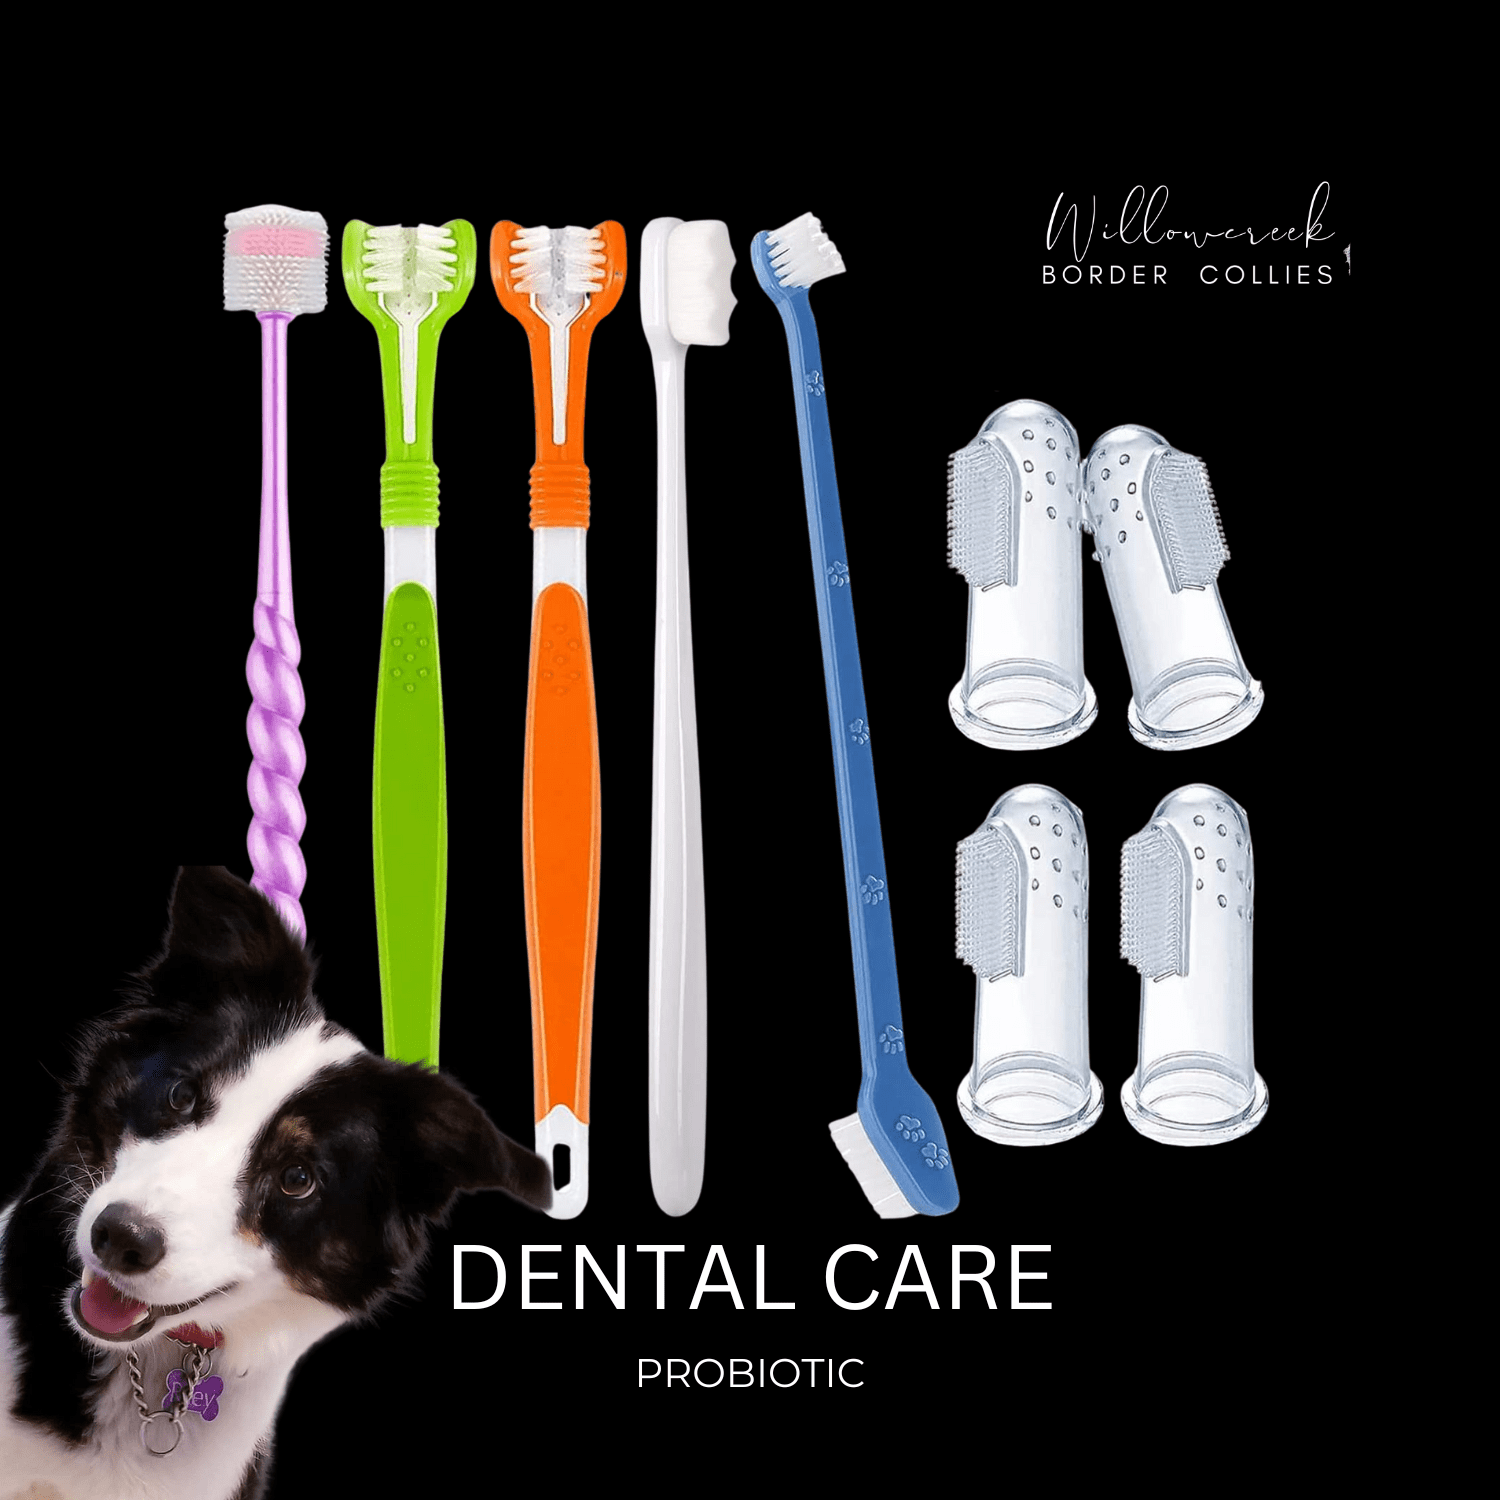 Puppy Dental Care | Tooth Brushes and Baking Soda, Simple as that!